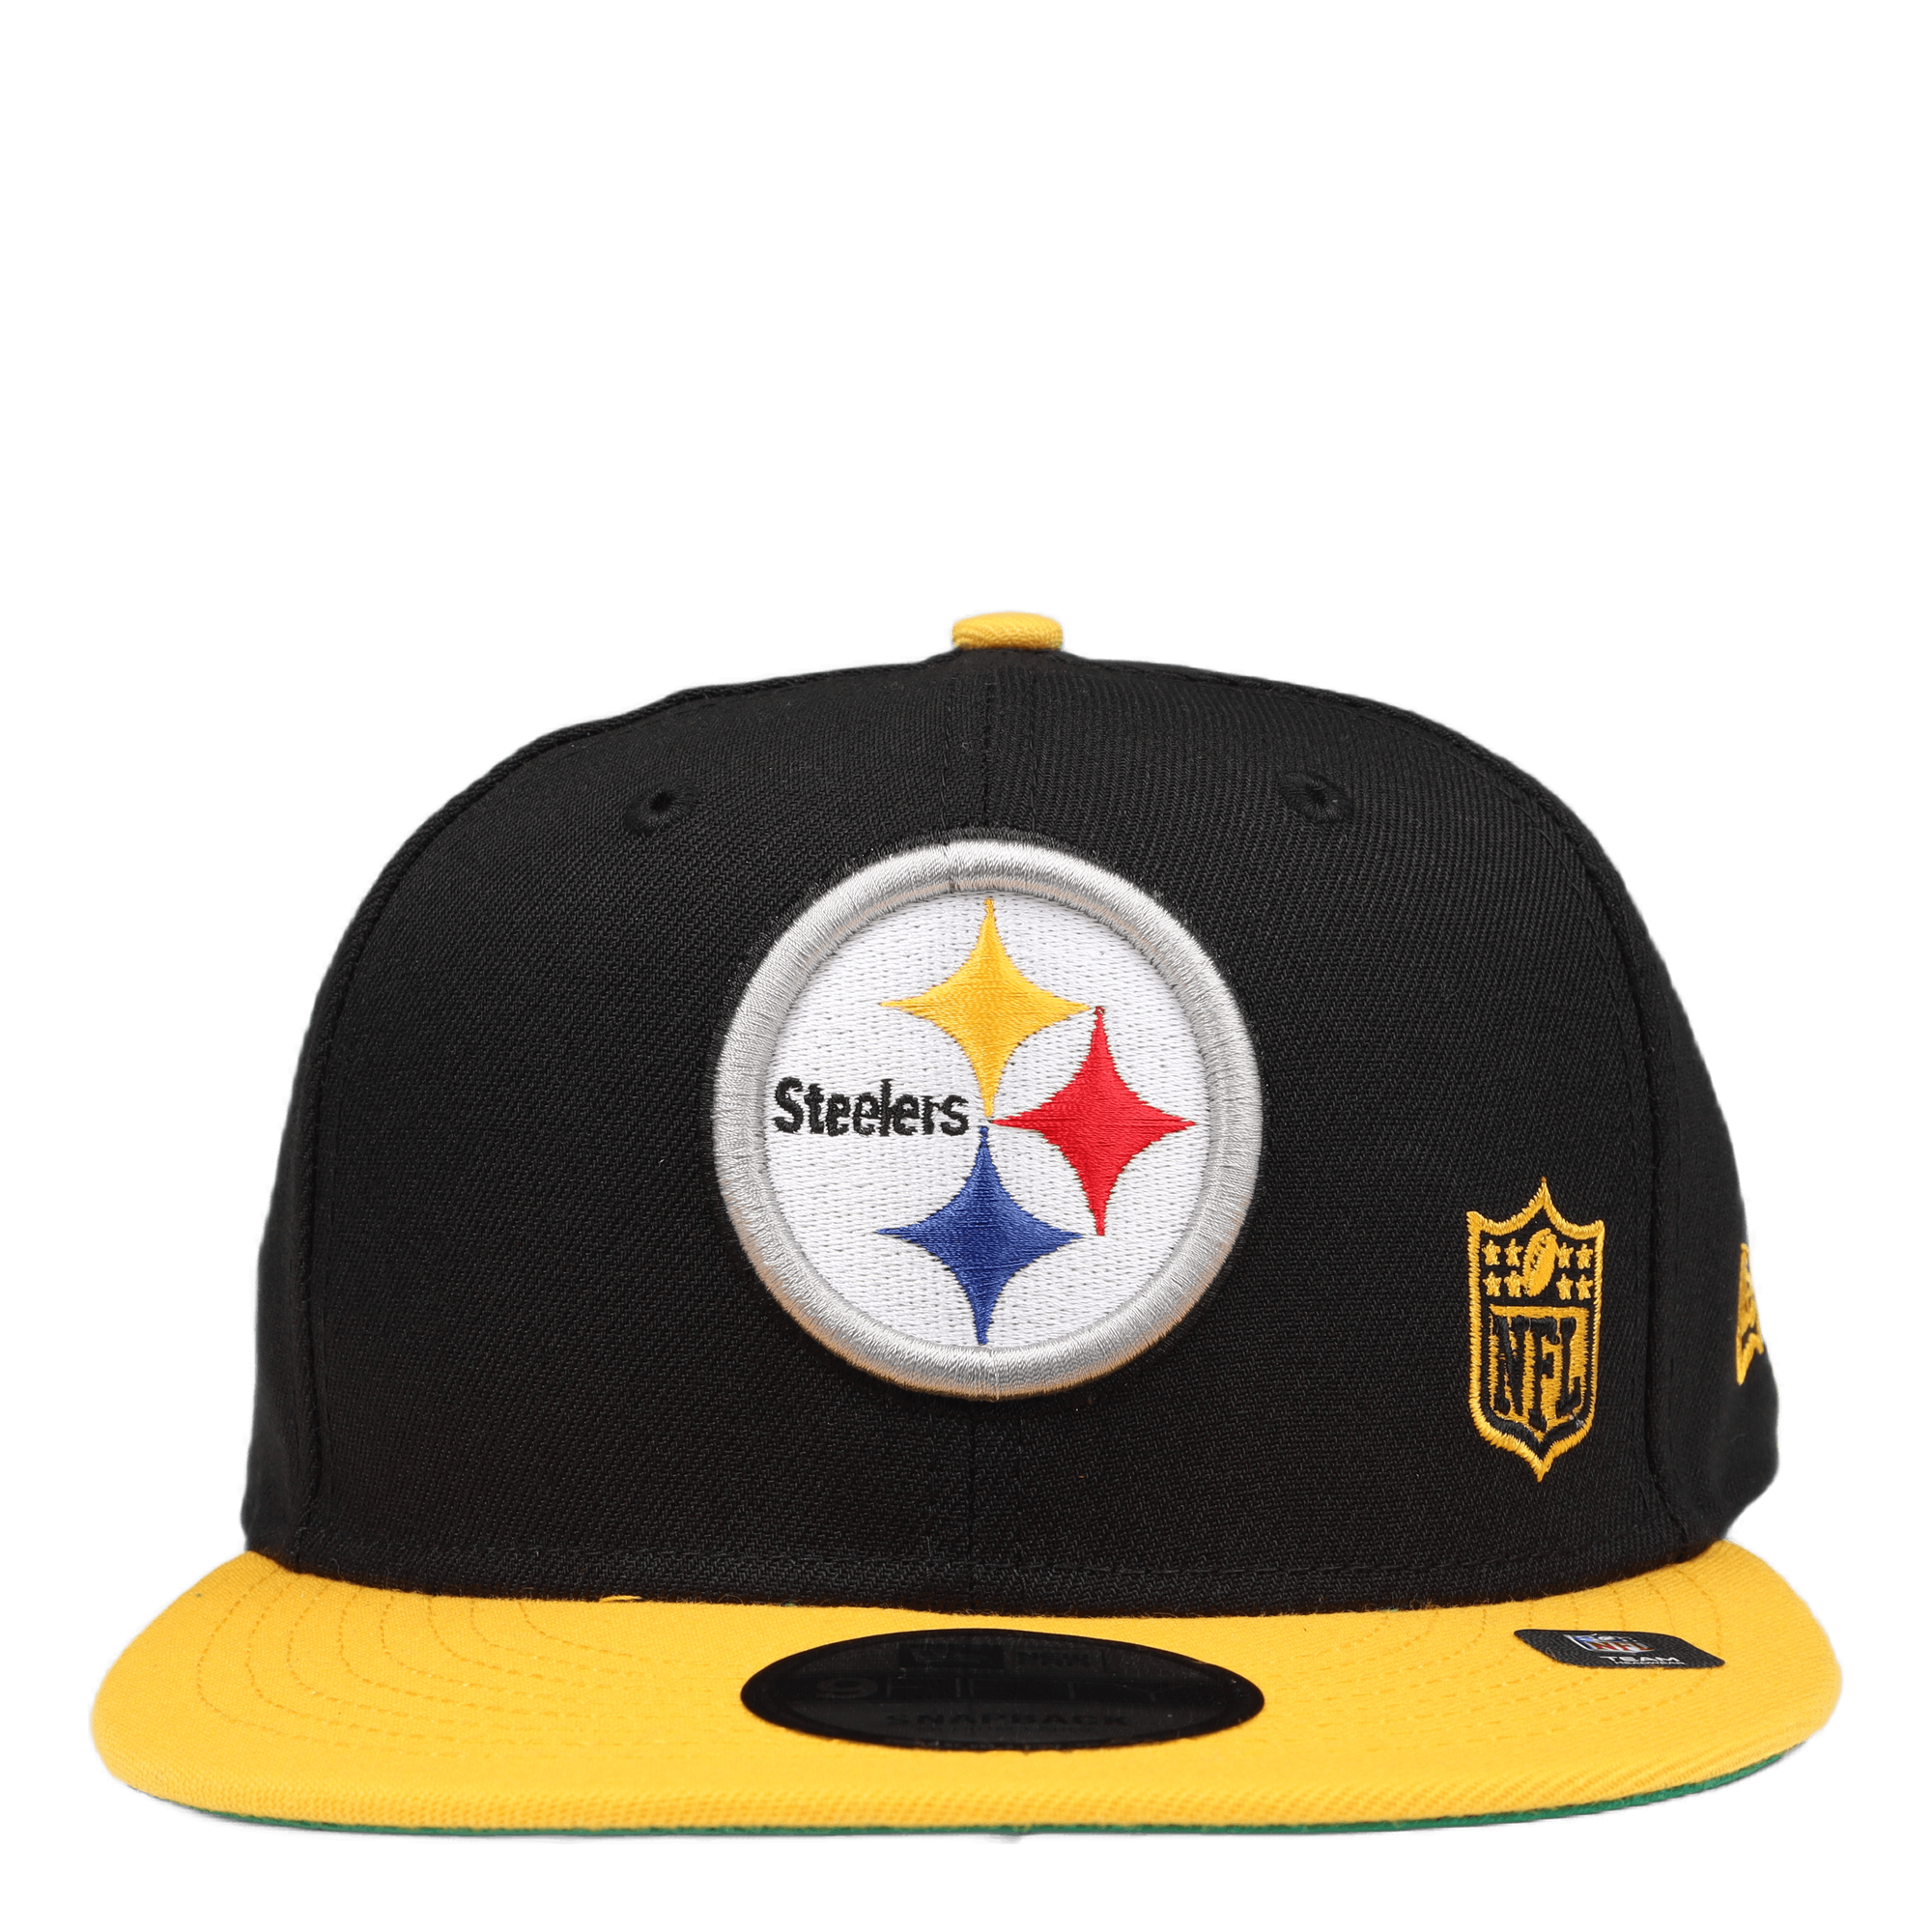 TEAM ARCH 950 STEELERS